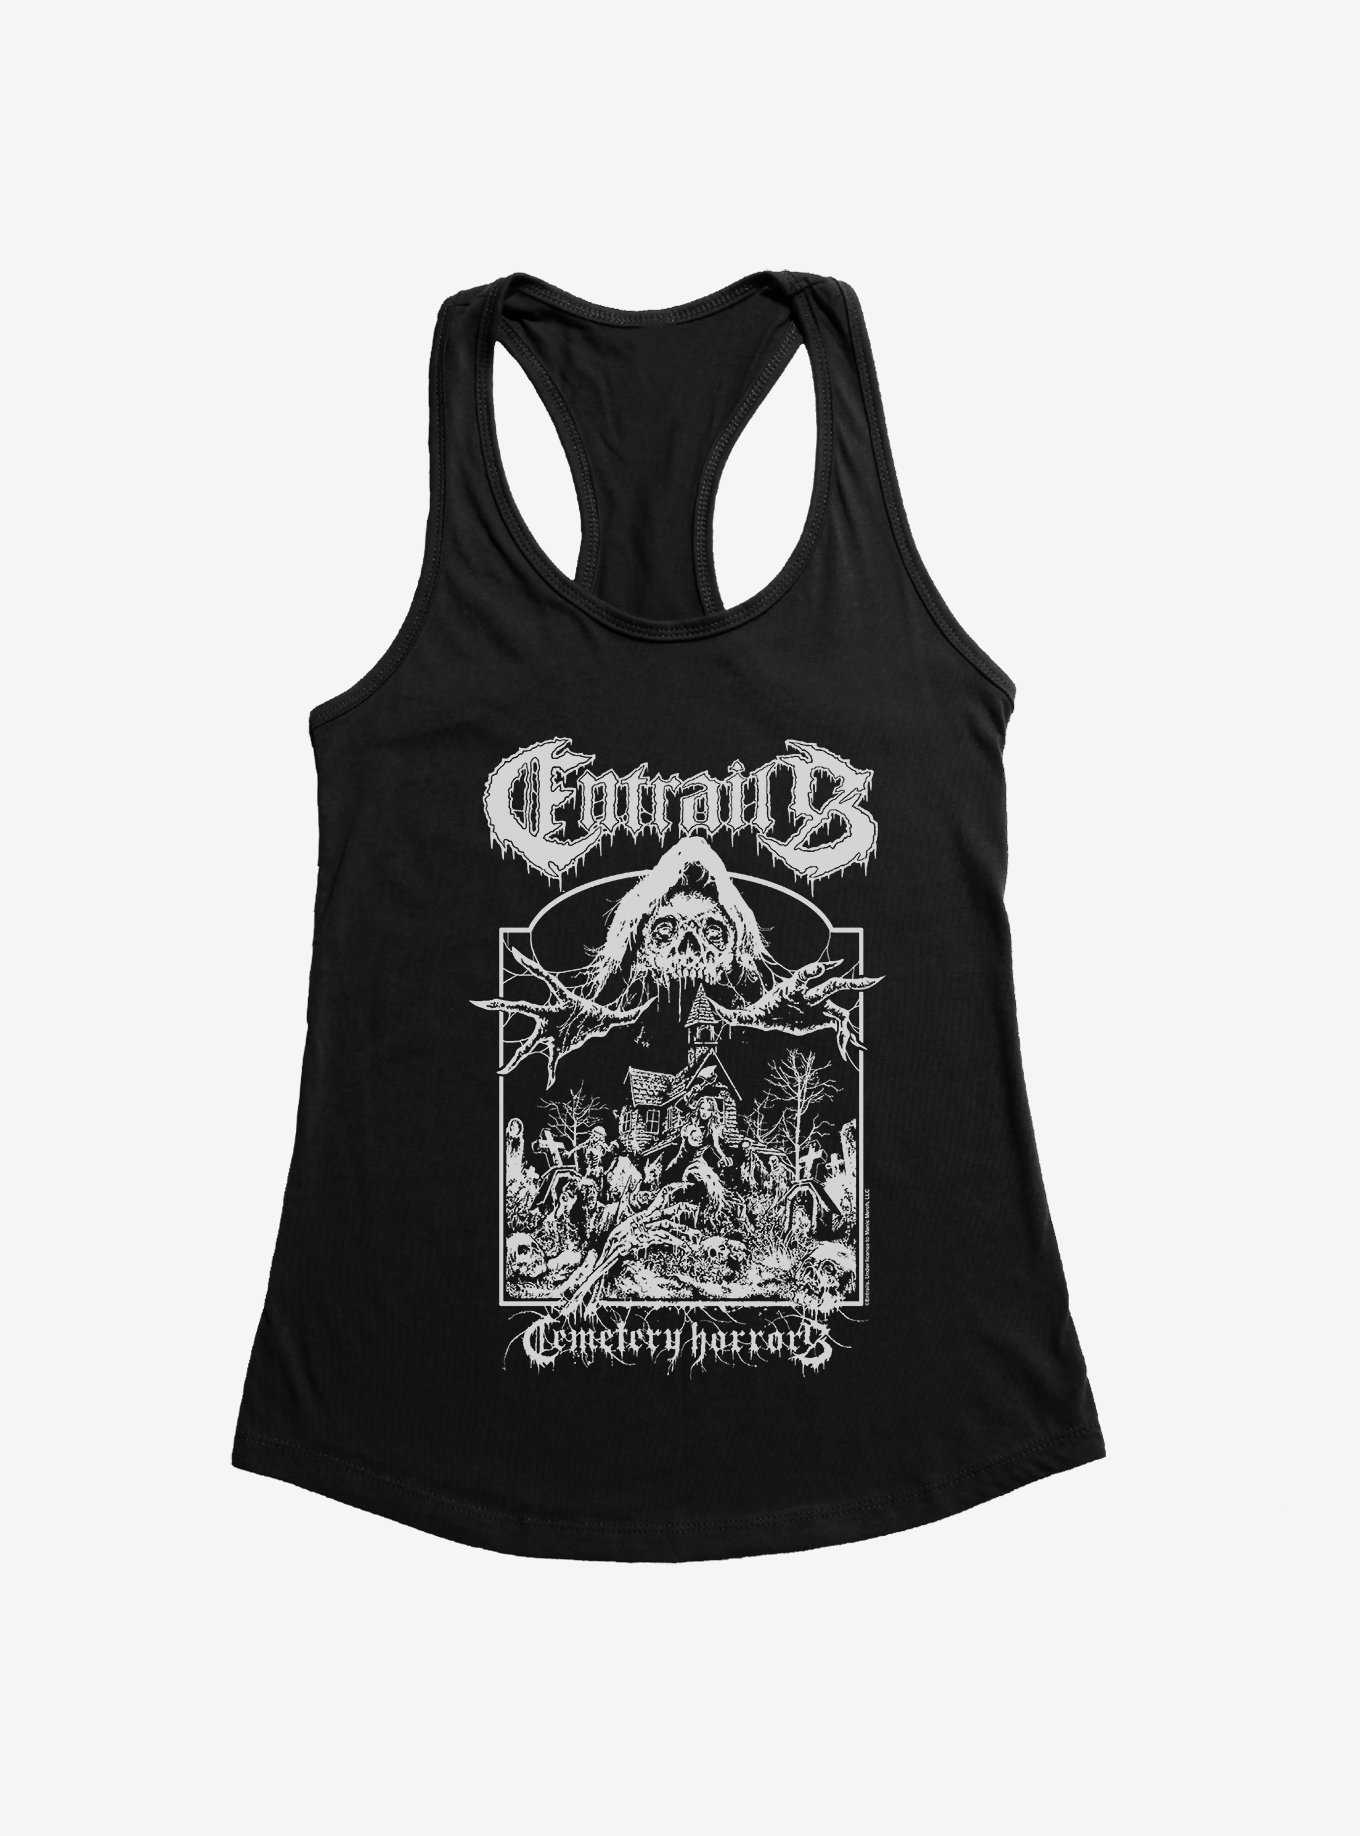 Entrails Cemetery Horrors Girls Tank, , hi-res